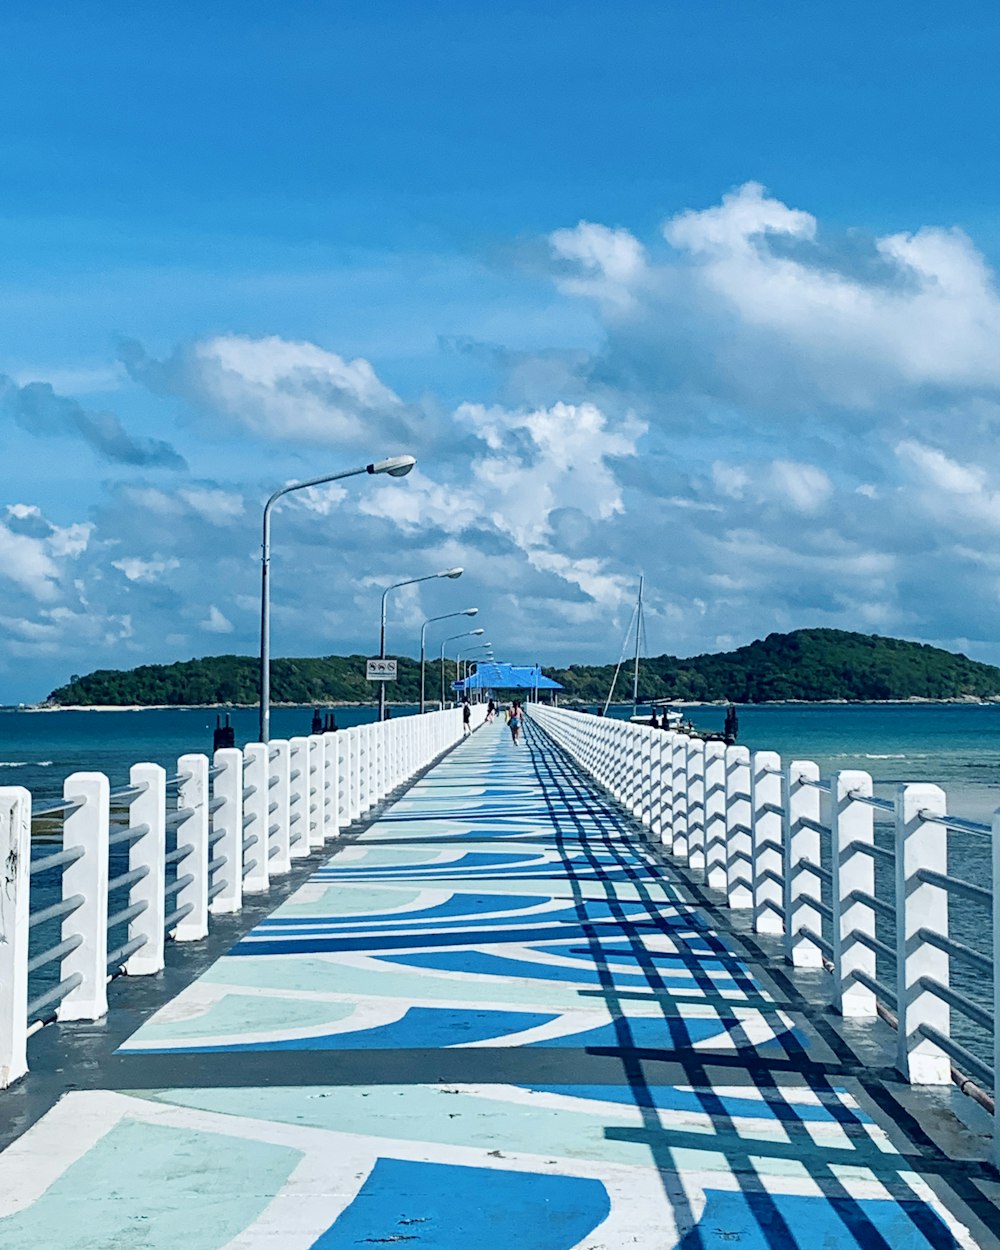 a long pier with a blue and white painted walkway